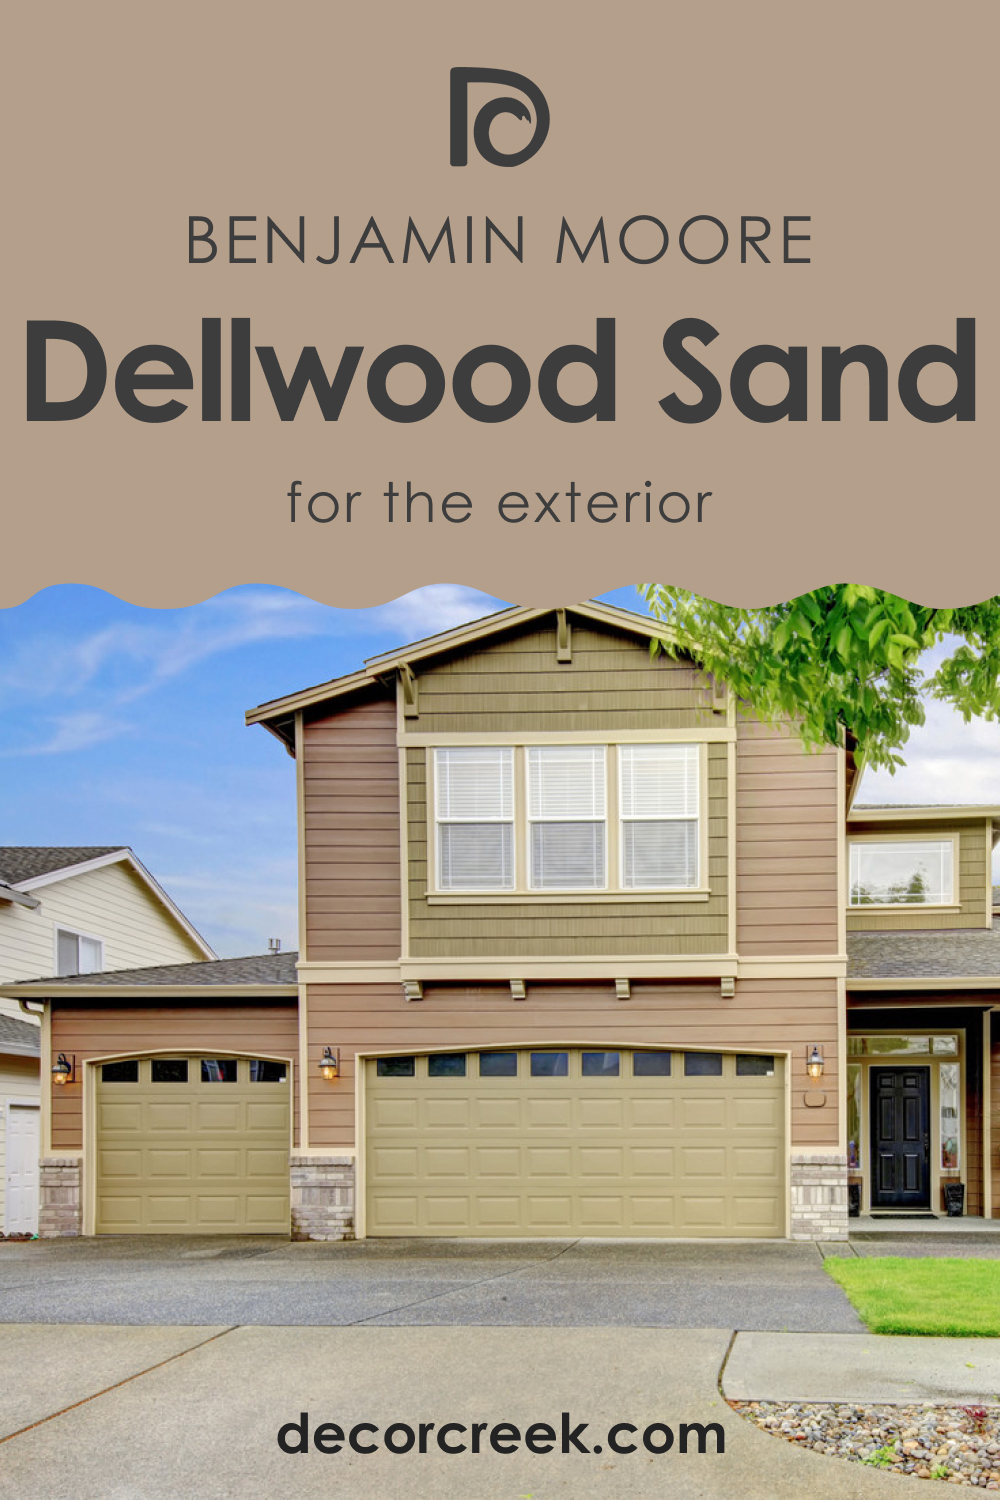 Dellwood Sand 1019 for an Exterior